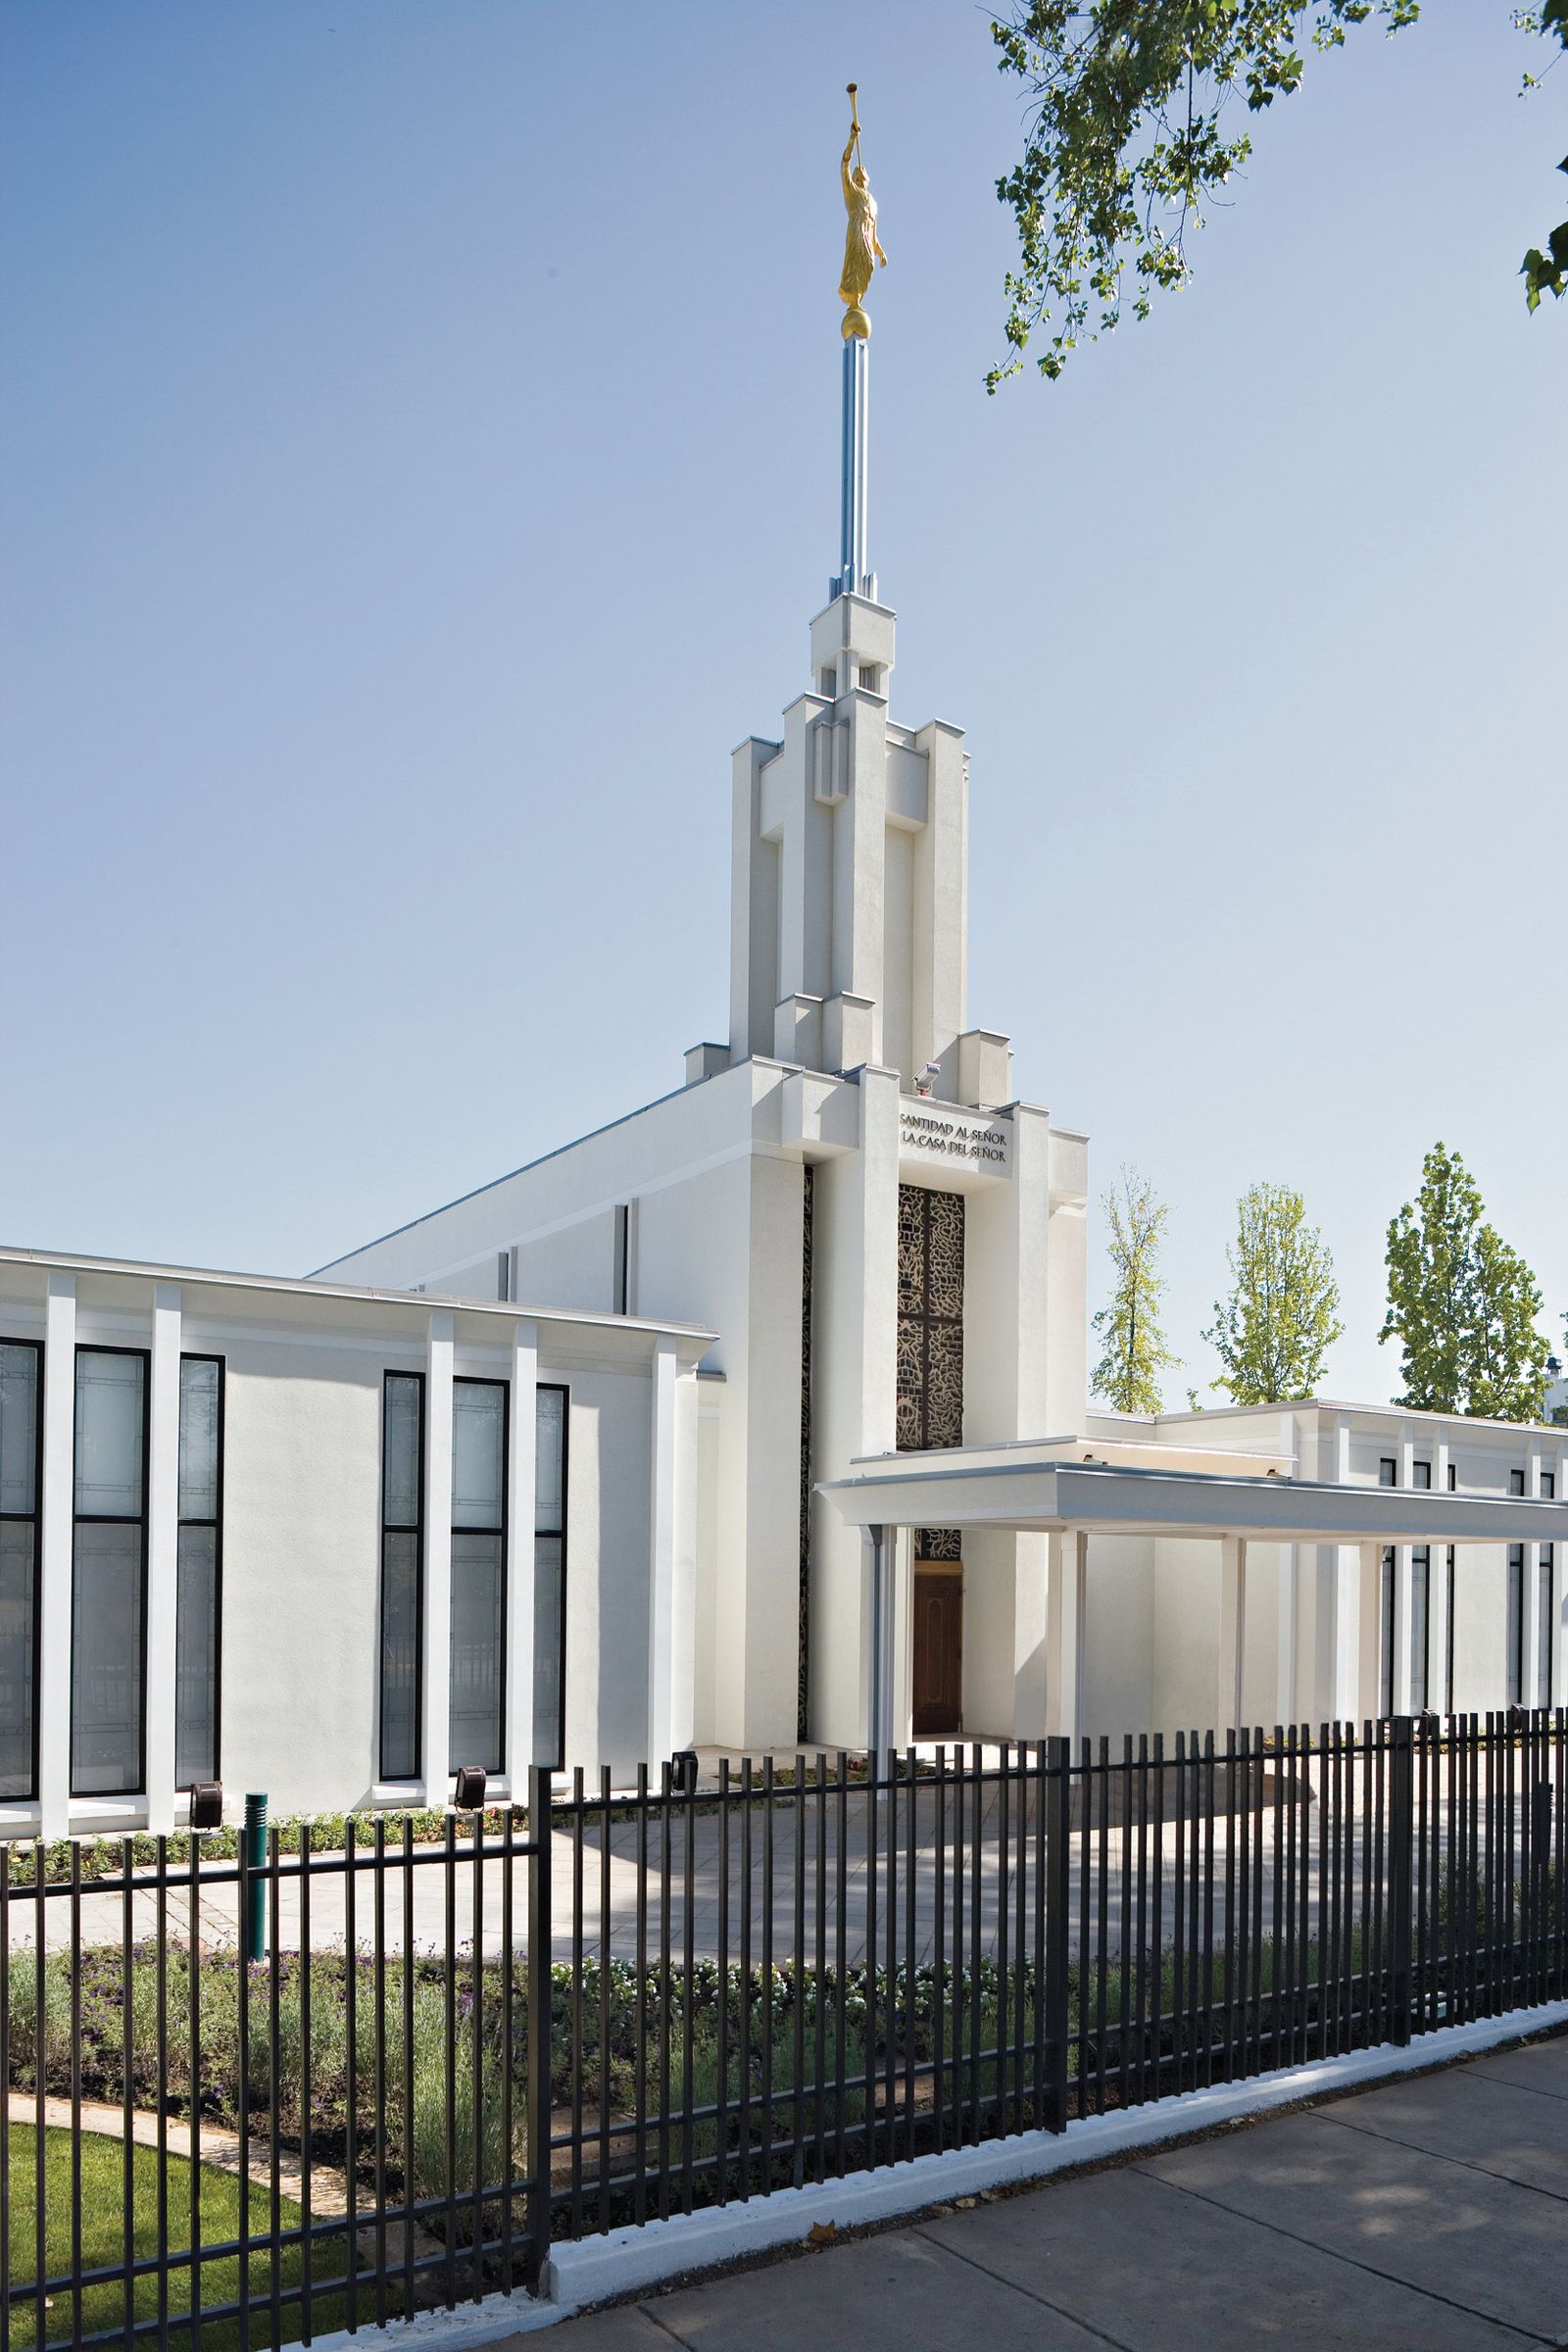 The Santiago Chile Temple, including the entrance and spire.